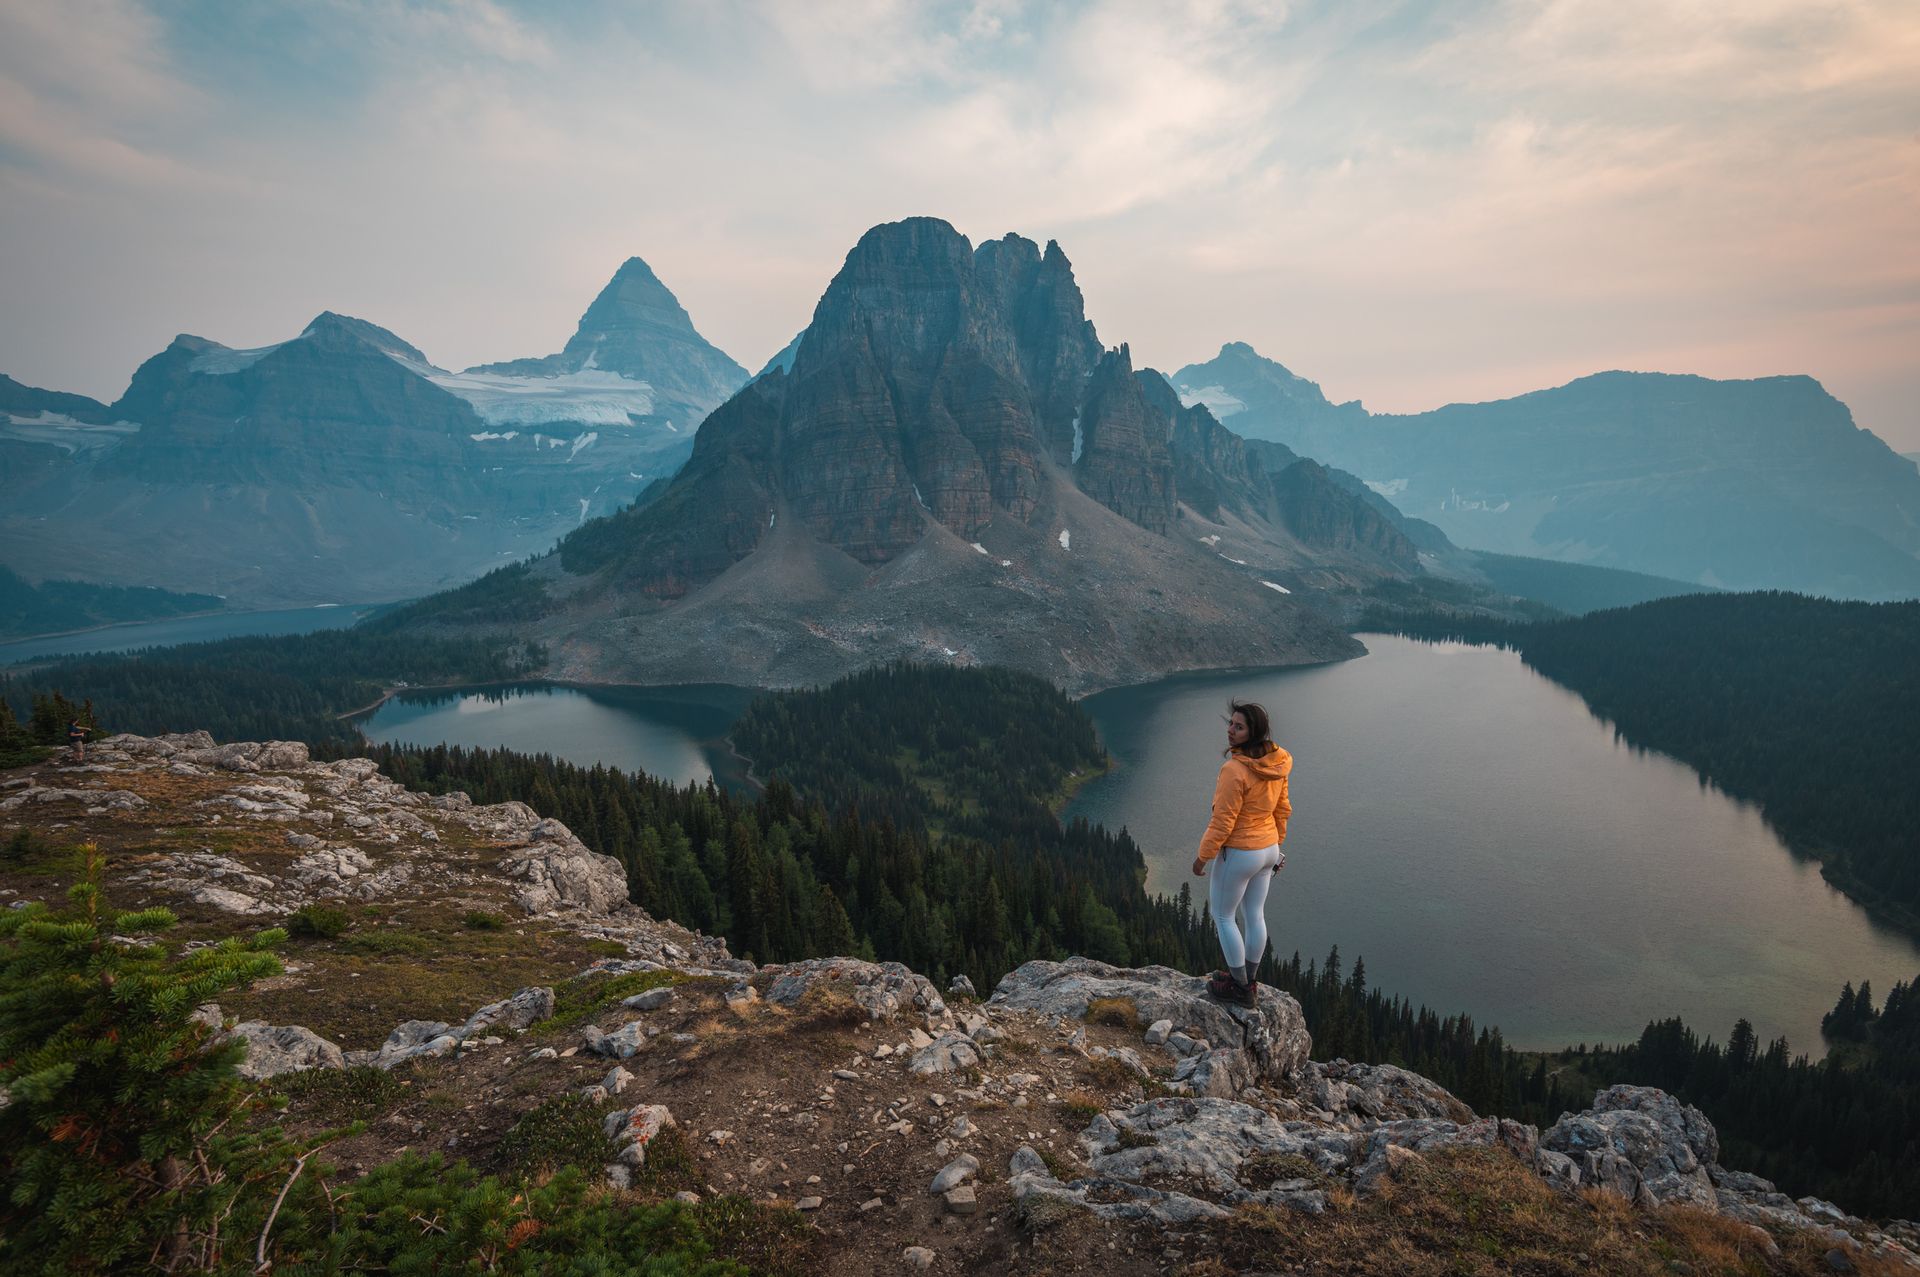 View of mount Assiniboine from Niblet, BC, Canada